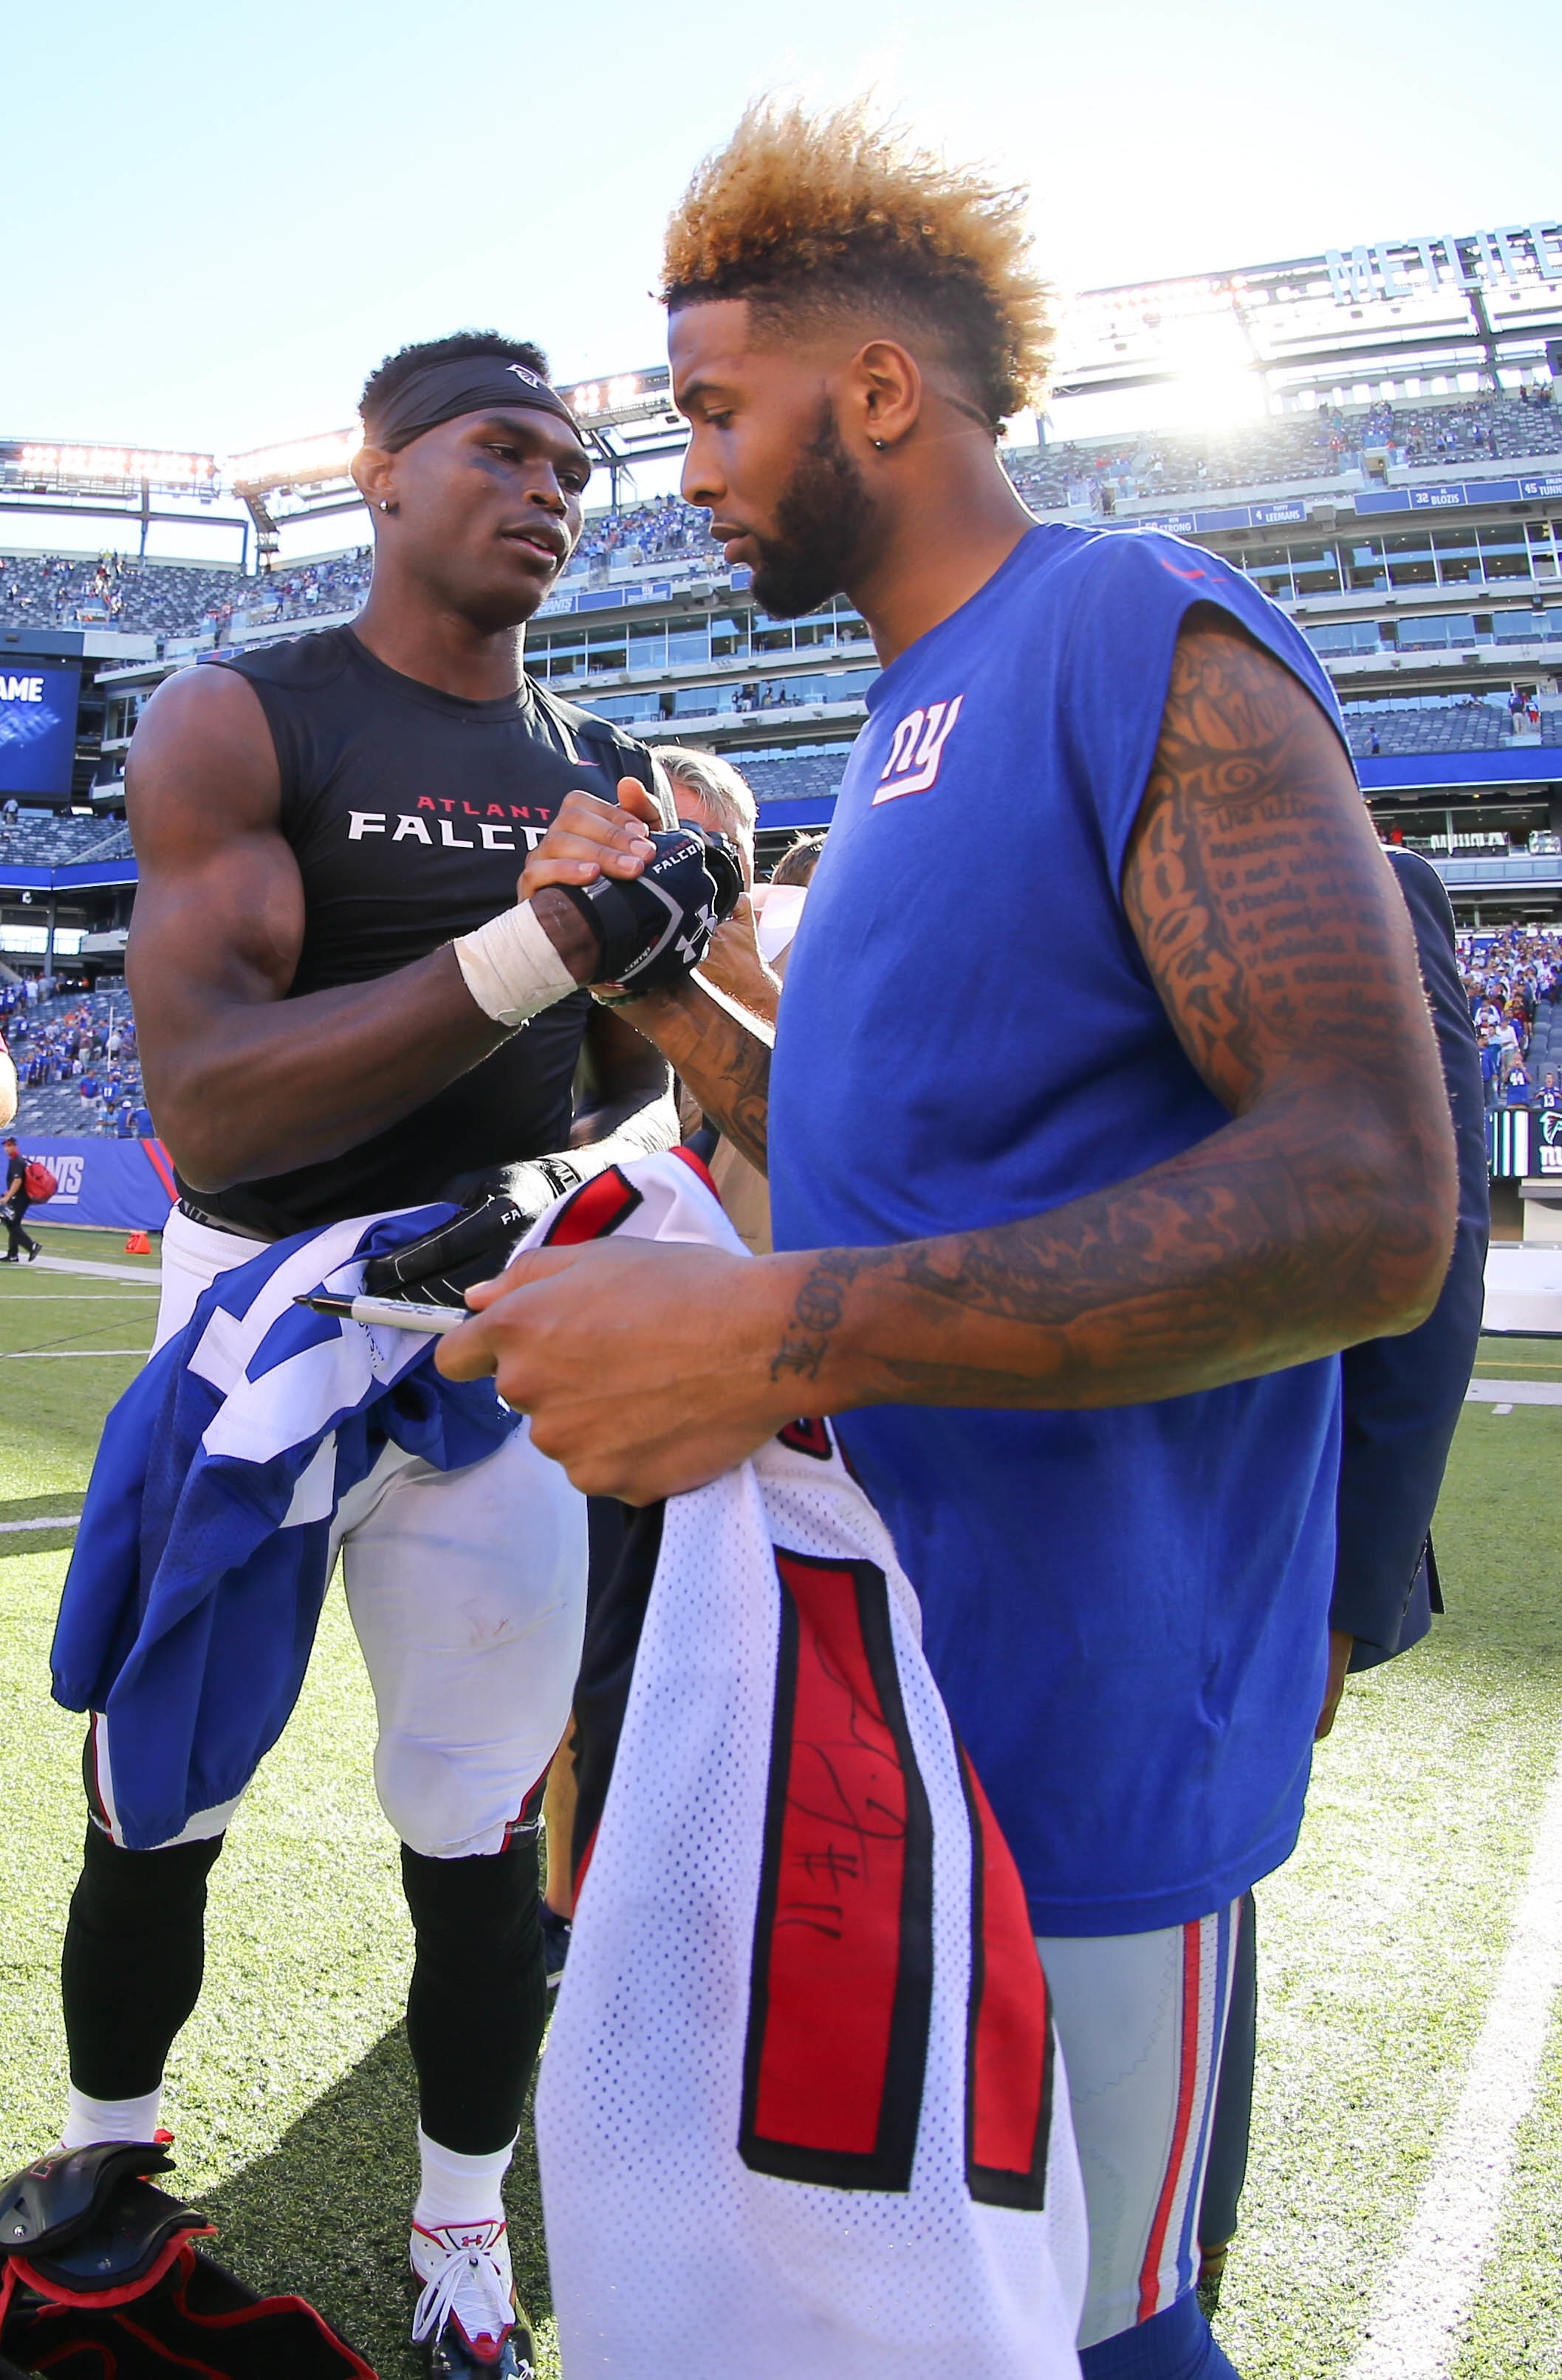 Atlanta Falcons wide receiver Julio Jones and New York Giants wide receiver Odell Beckham Jr. exchange jerseys after their game at MetLife Stadium